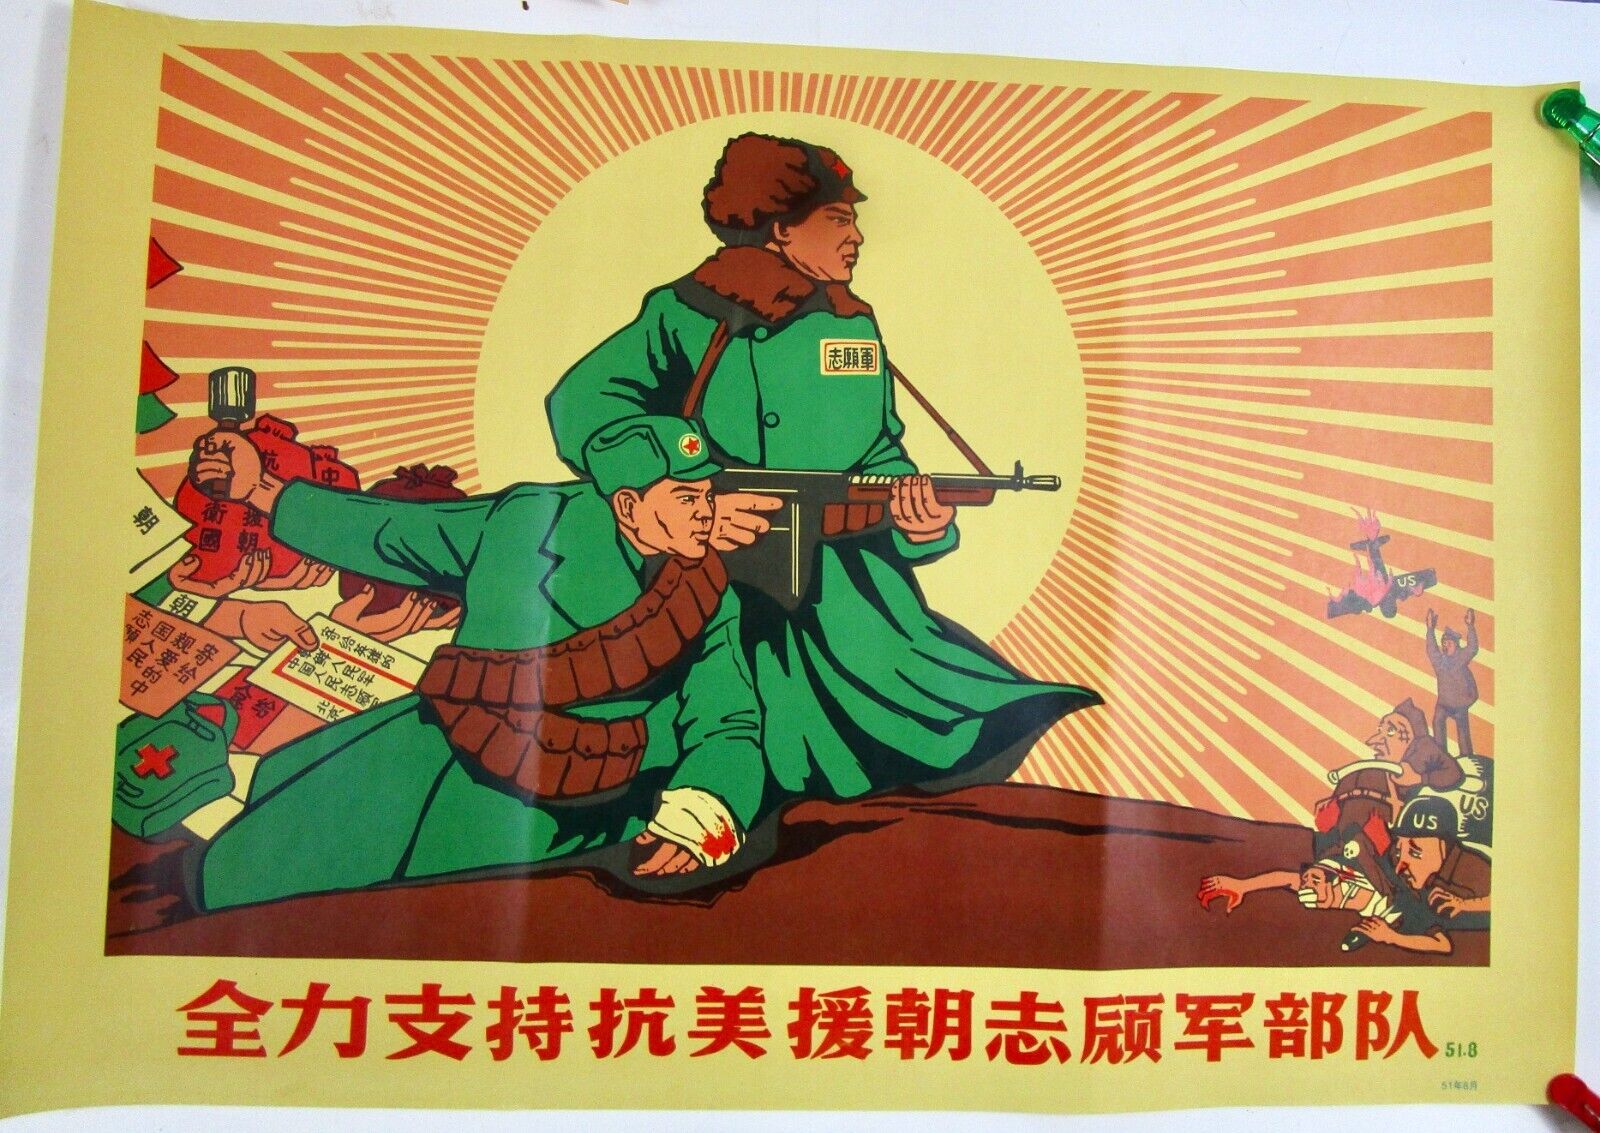 Large Communist China Poster of Revolutionary Soldiers in Action, Number 6